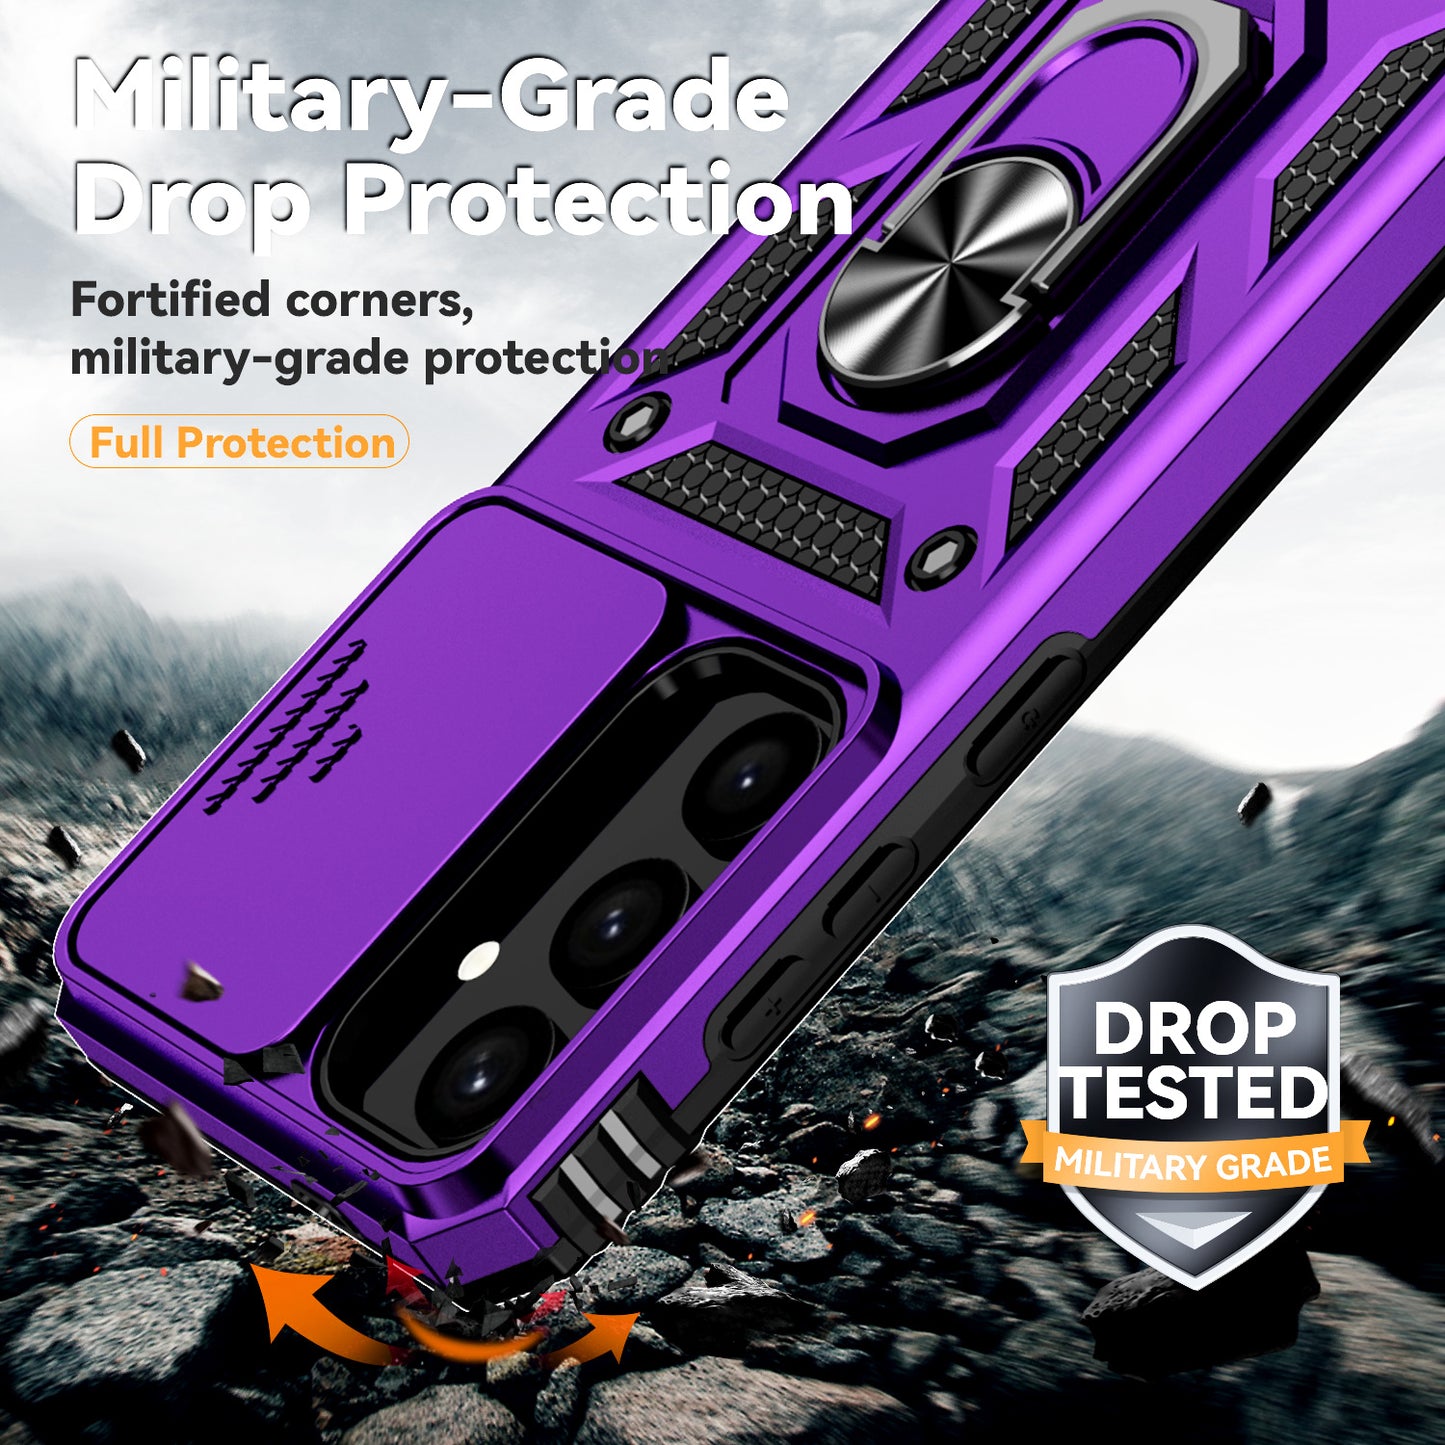 Case with Camera Slide Protector Kickstand PC+TPU Purple Phone Cover - For Samsung Galaxy S24